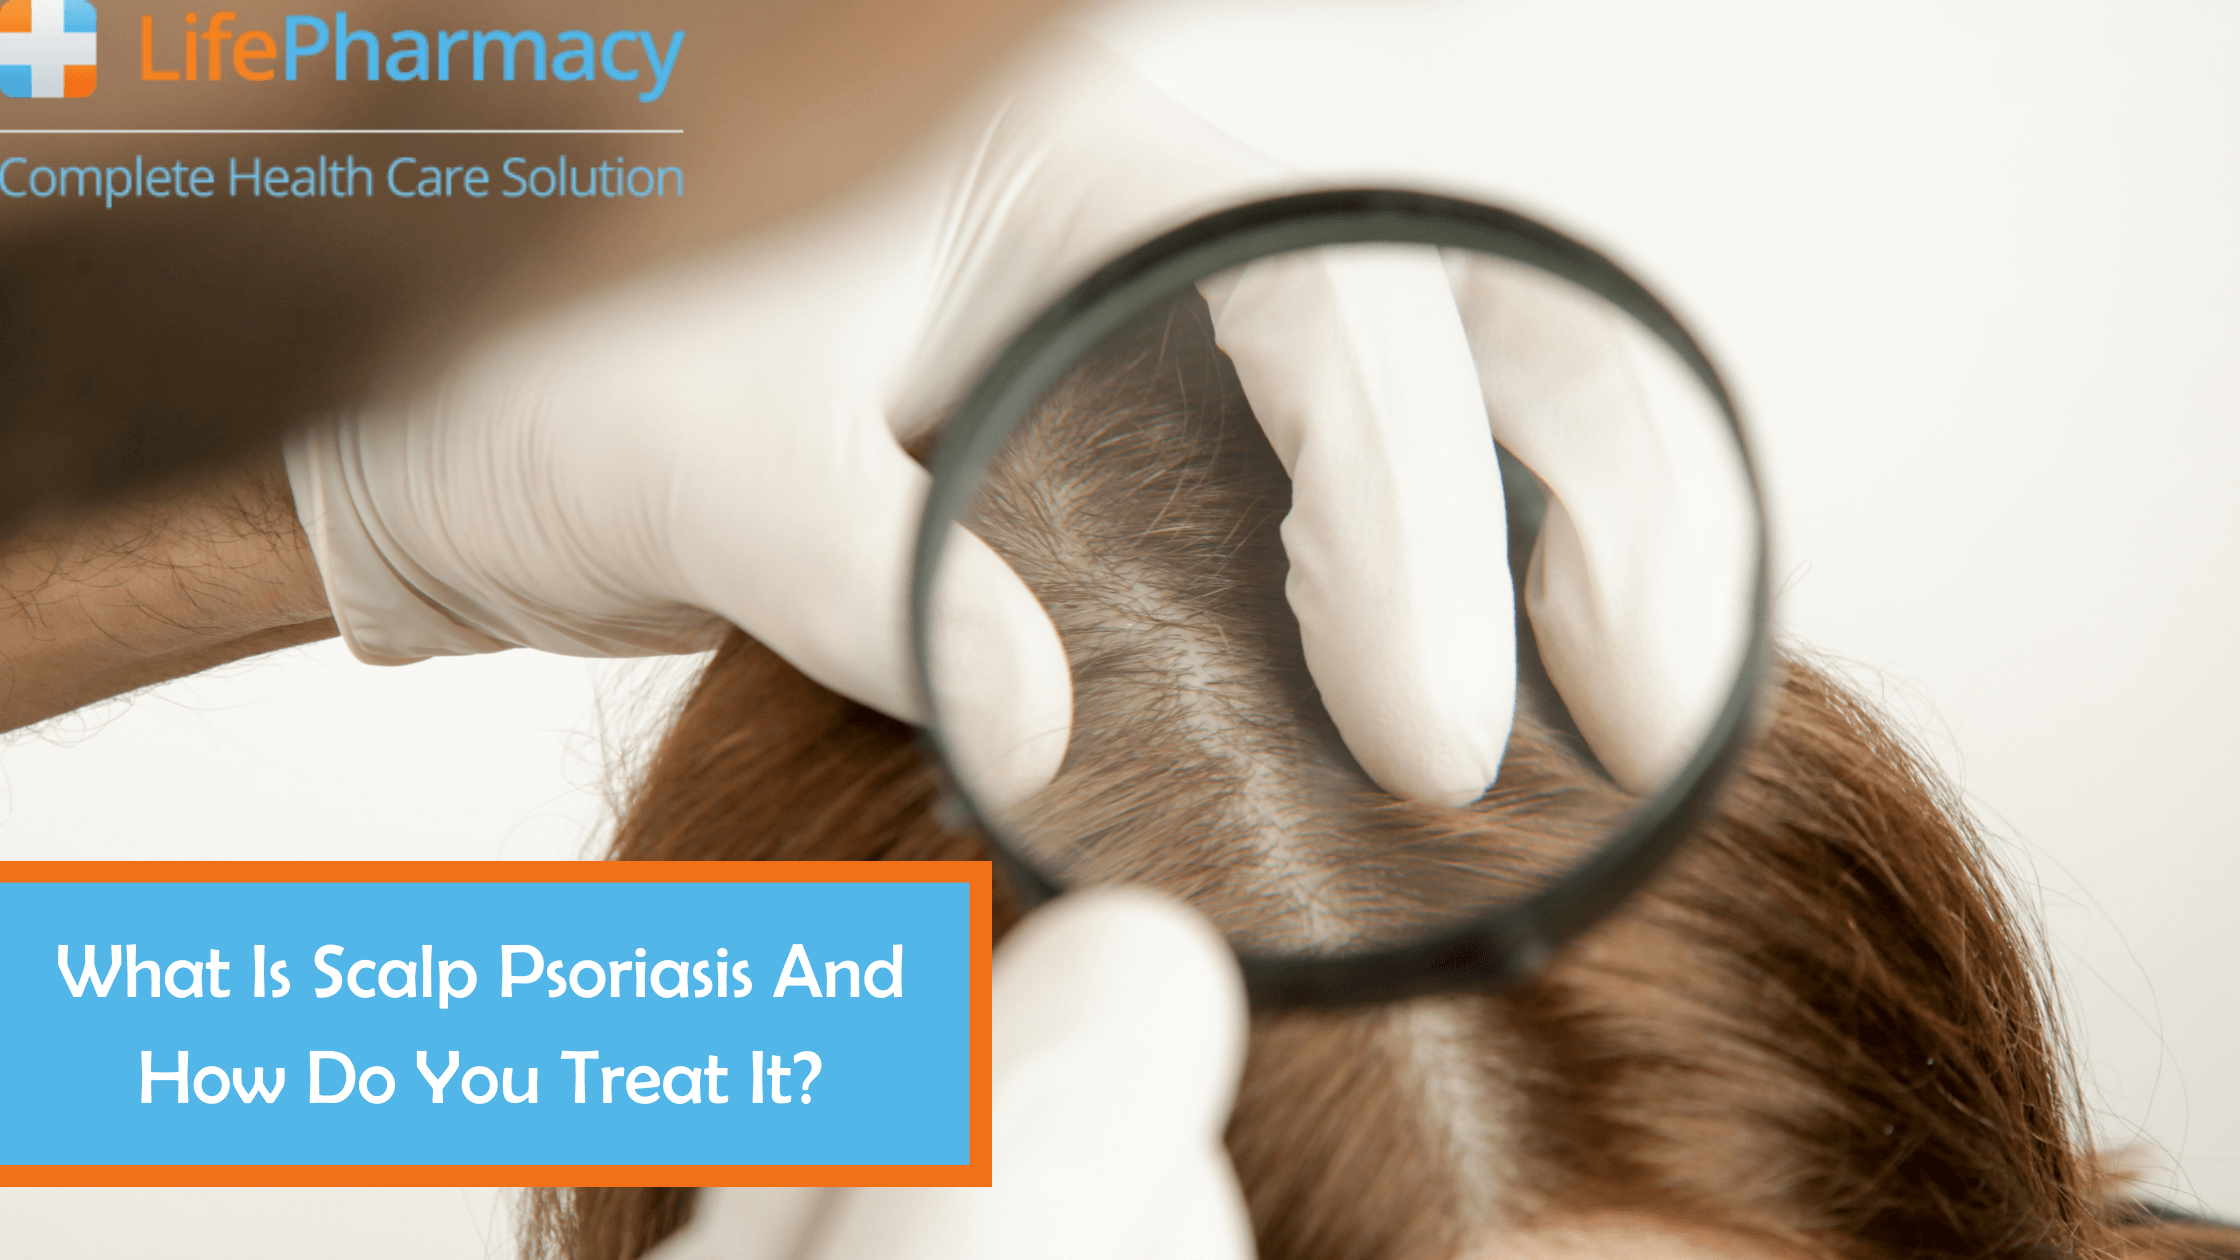 What Is Scalp Psoriasis And How Do You Treat It?